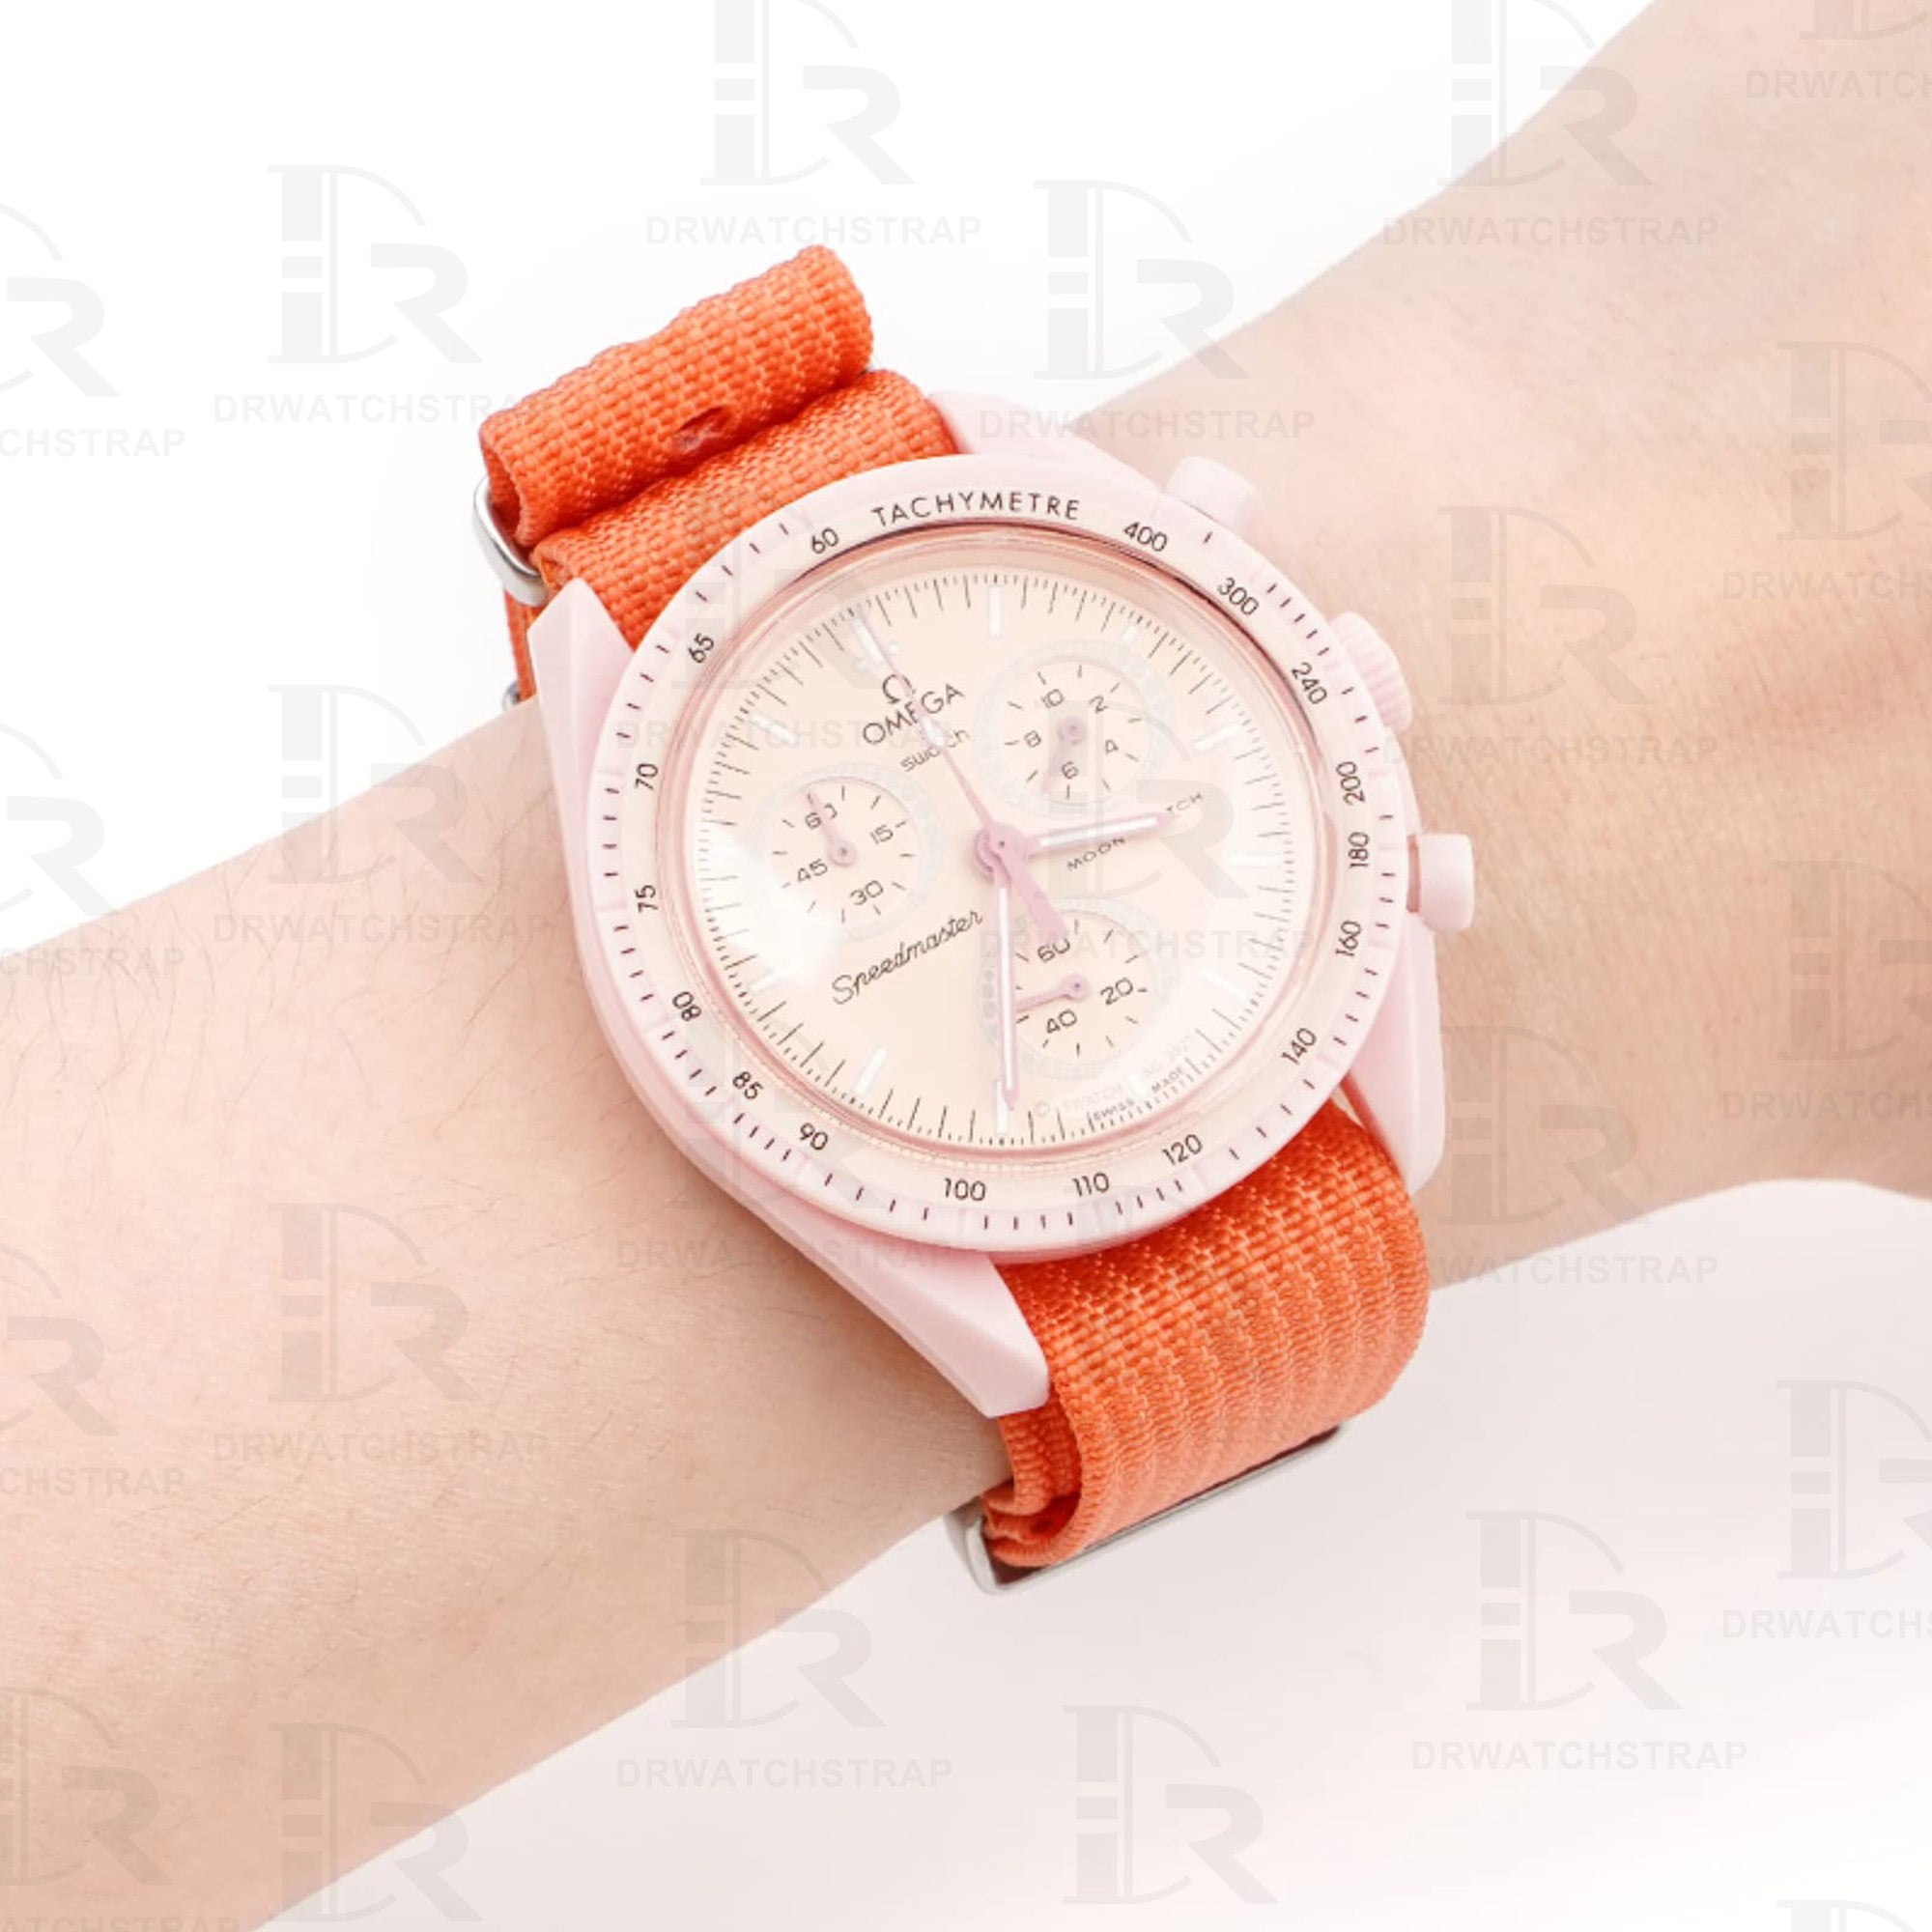 Buy Omega and swatch Moonswatch Nato strap 20mm Orange watch band (2)